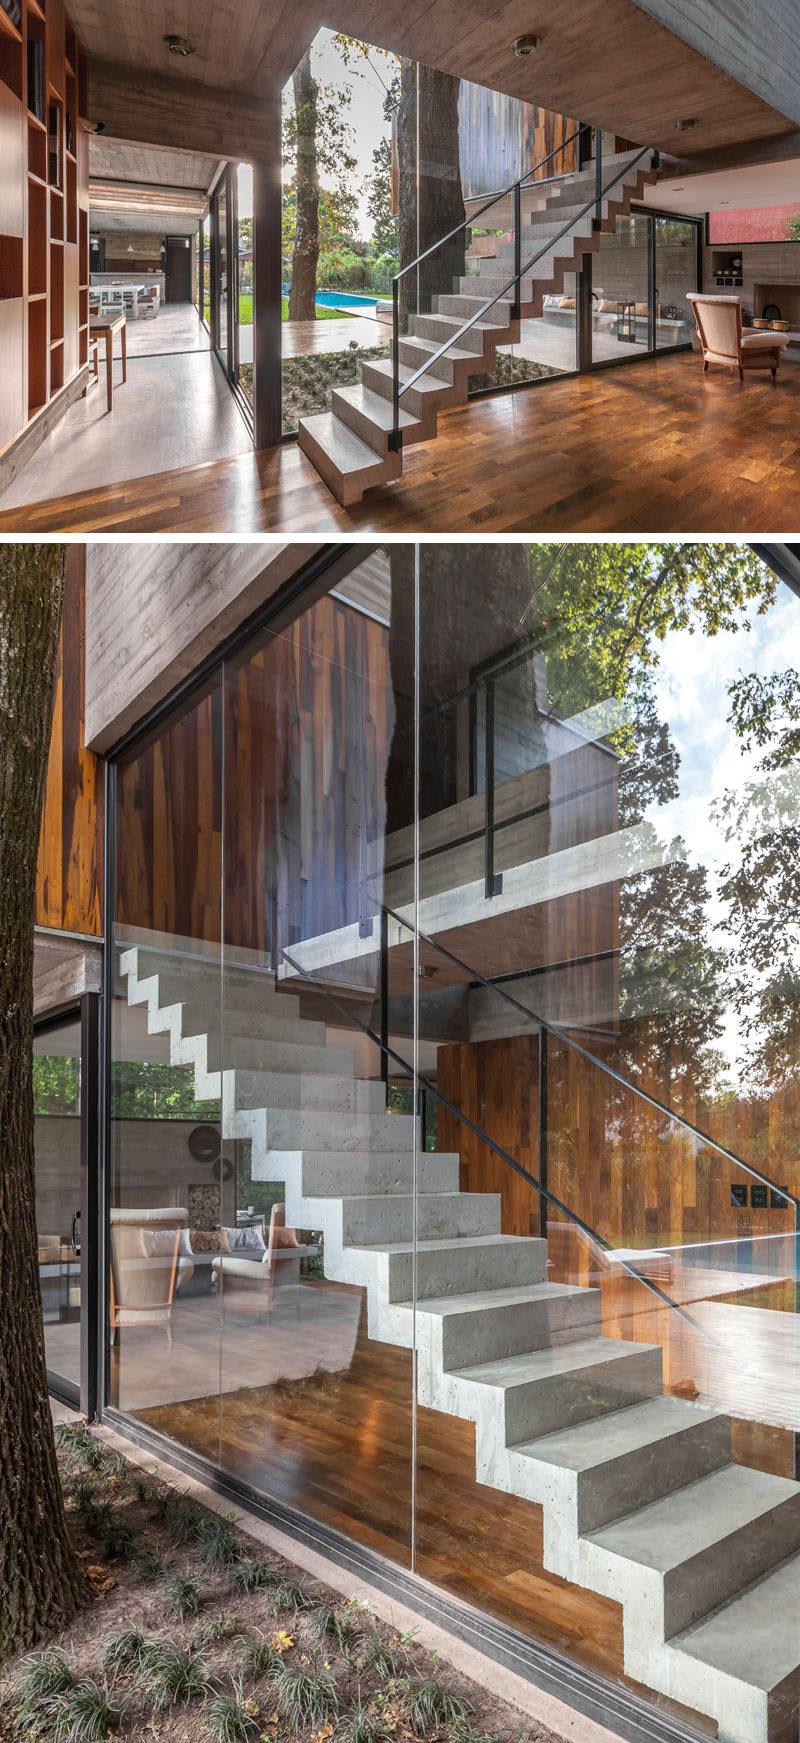 Concrete stairs lead to the upper level of this modern house, while the large windows show off the stairs when viewed from the backyard. #ModernStairs #ConcreteStairs #Windows